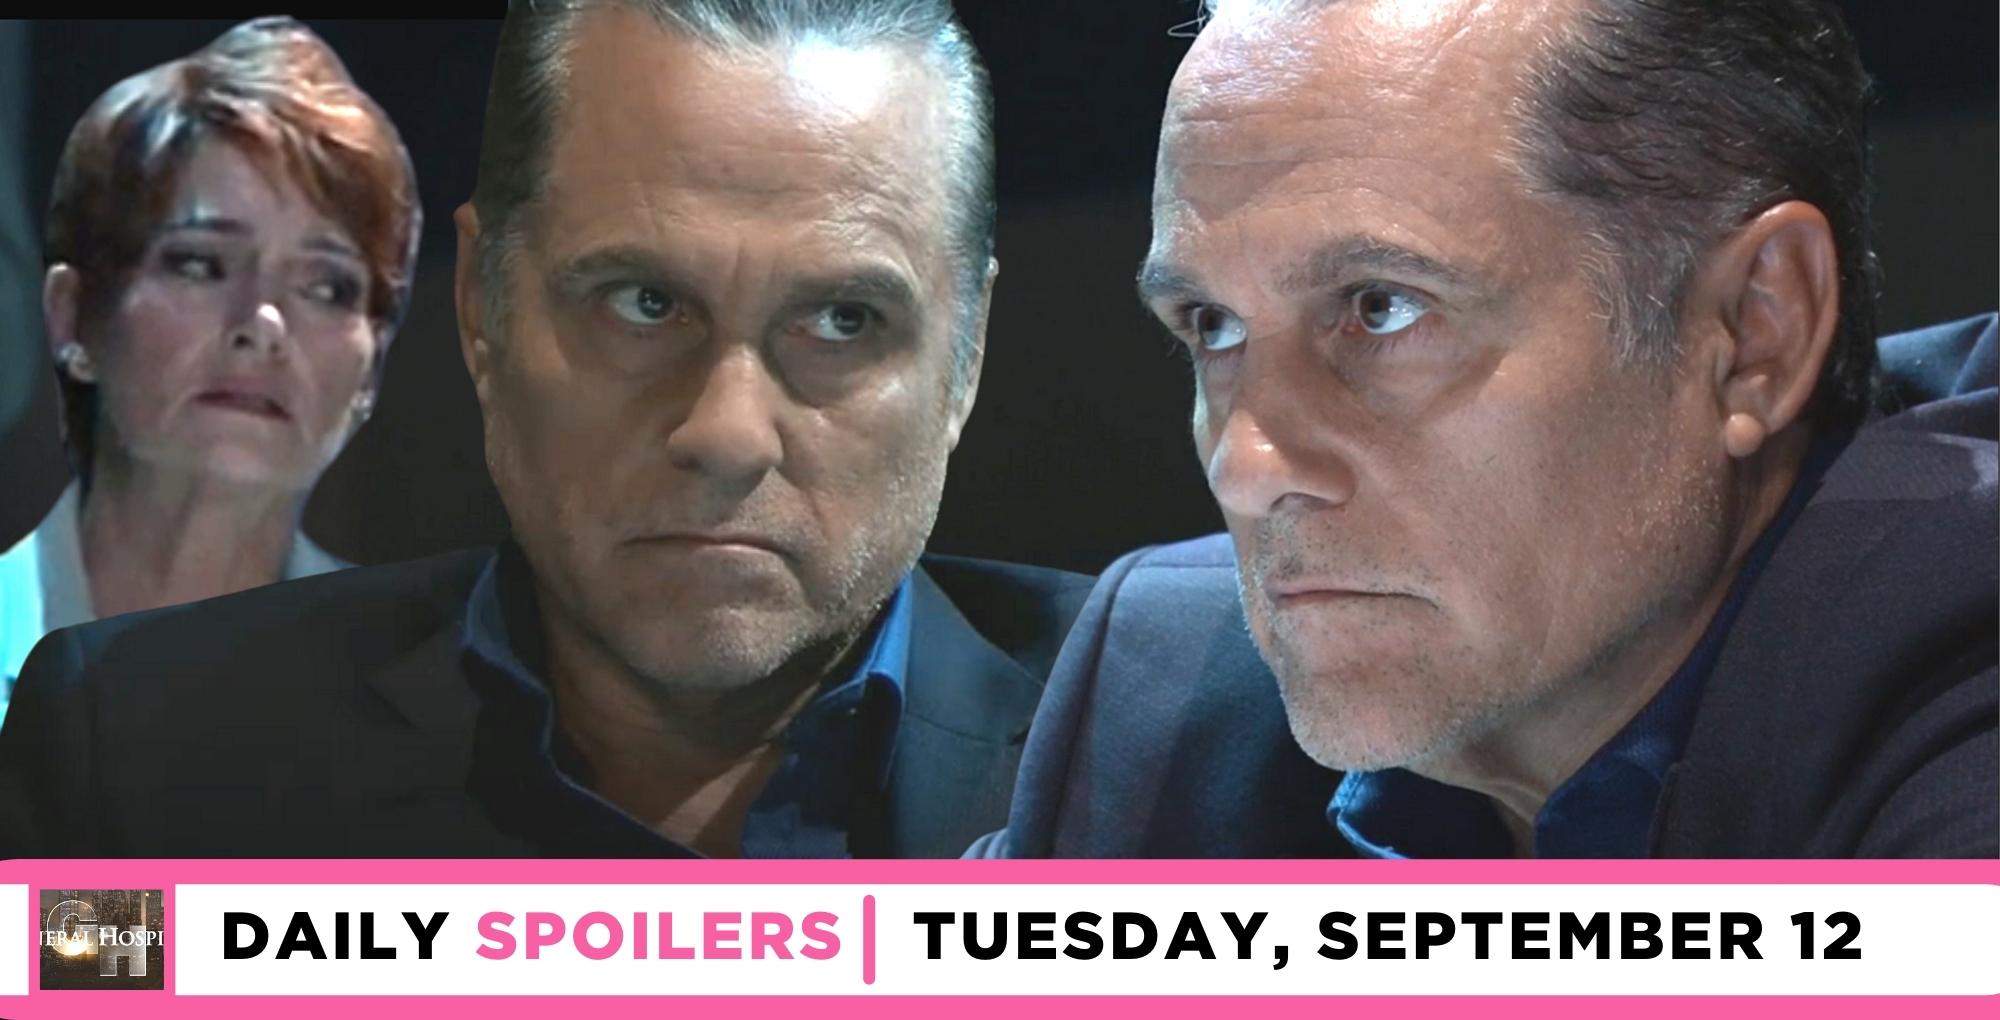 general hospital spoilers for september 12, 2023, have diane in the background and two images of sonny.